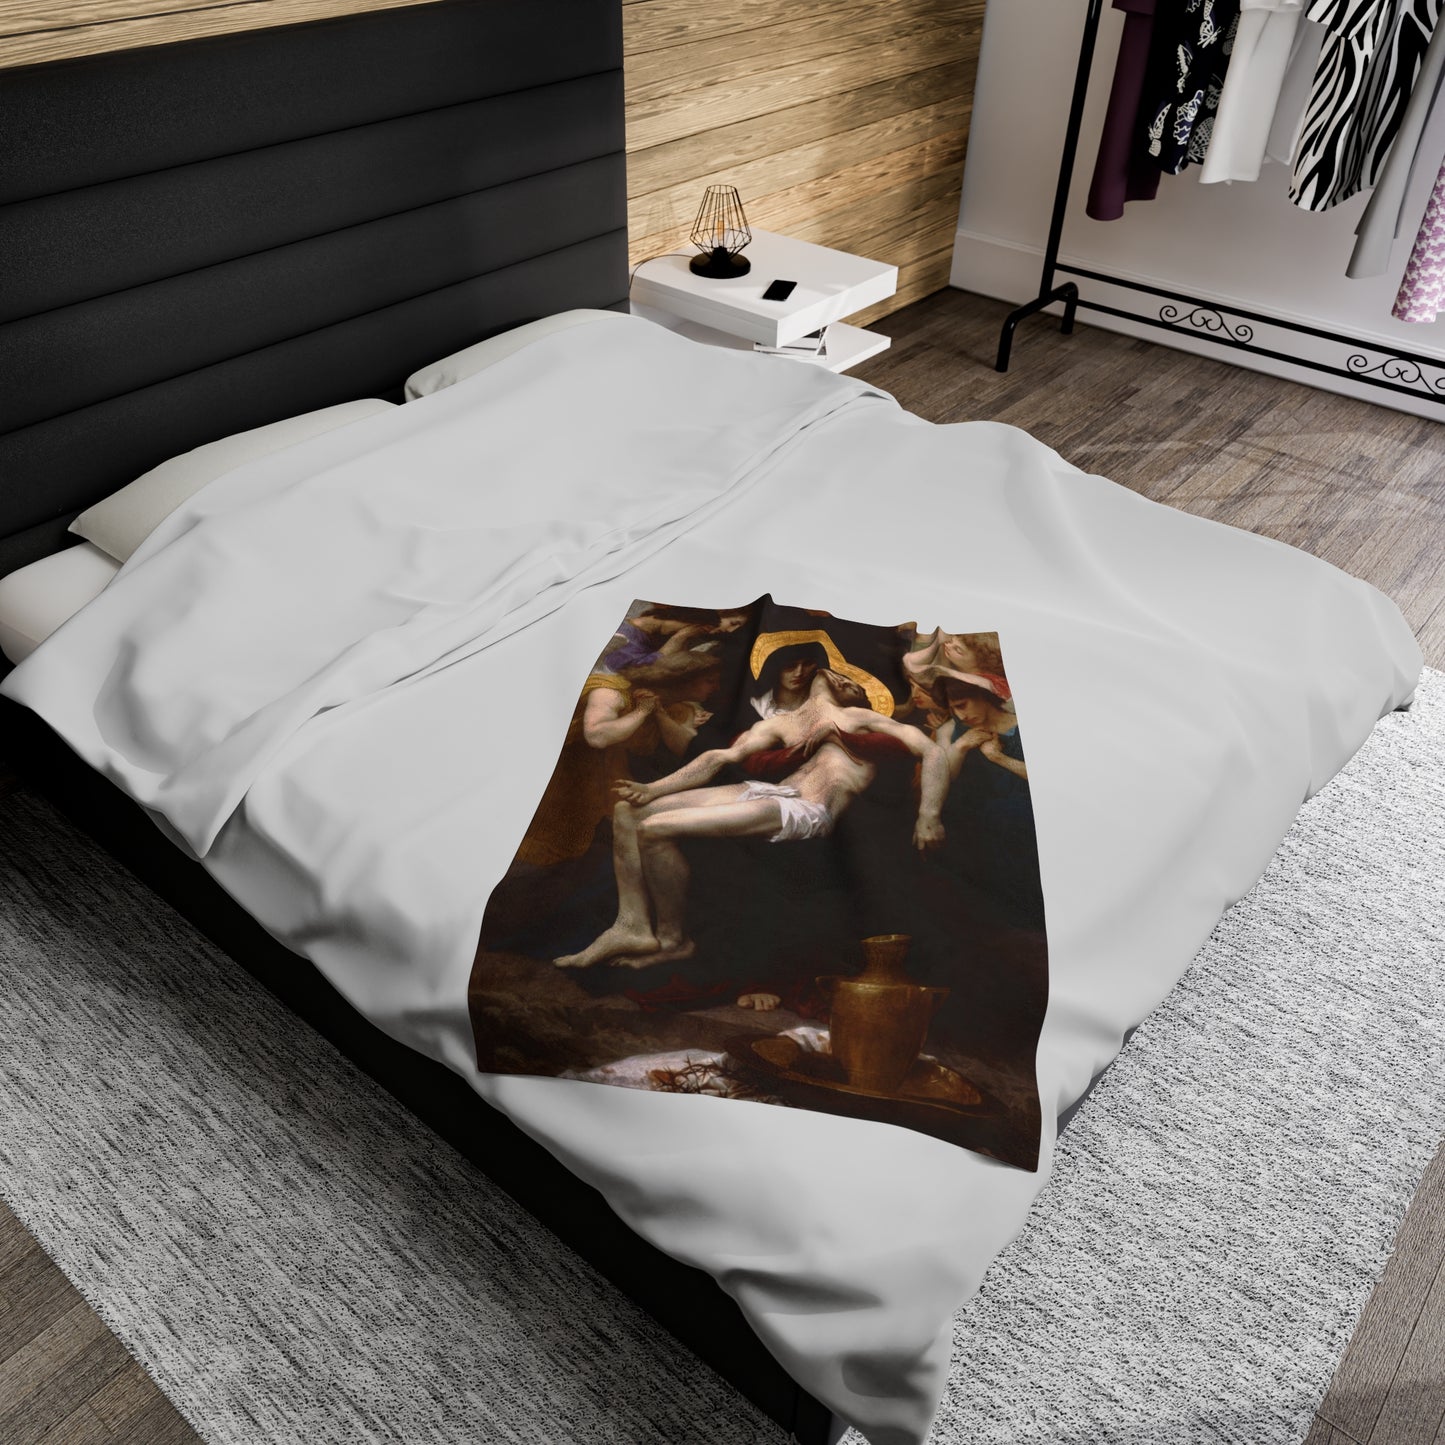 The Pieta Catholic Plush Blanket by William Bouguereau, Religious Home Decor for Couch or Bedding, Christmas Gift Idea for Christian